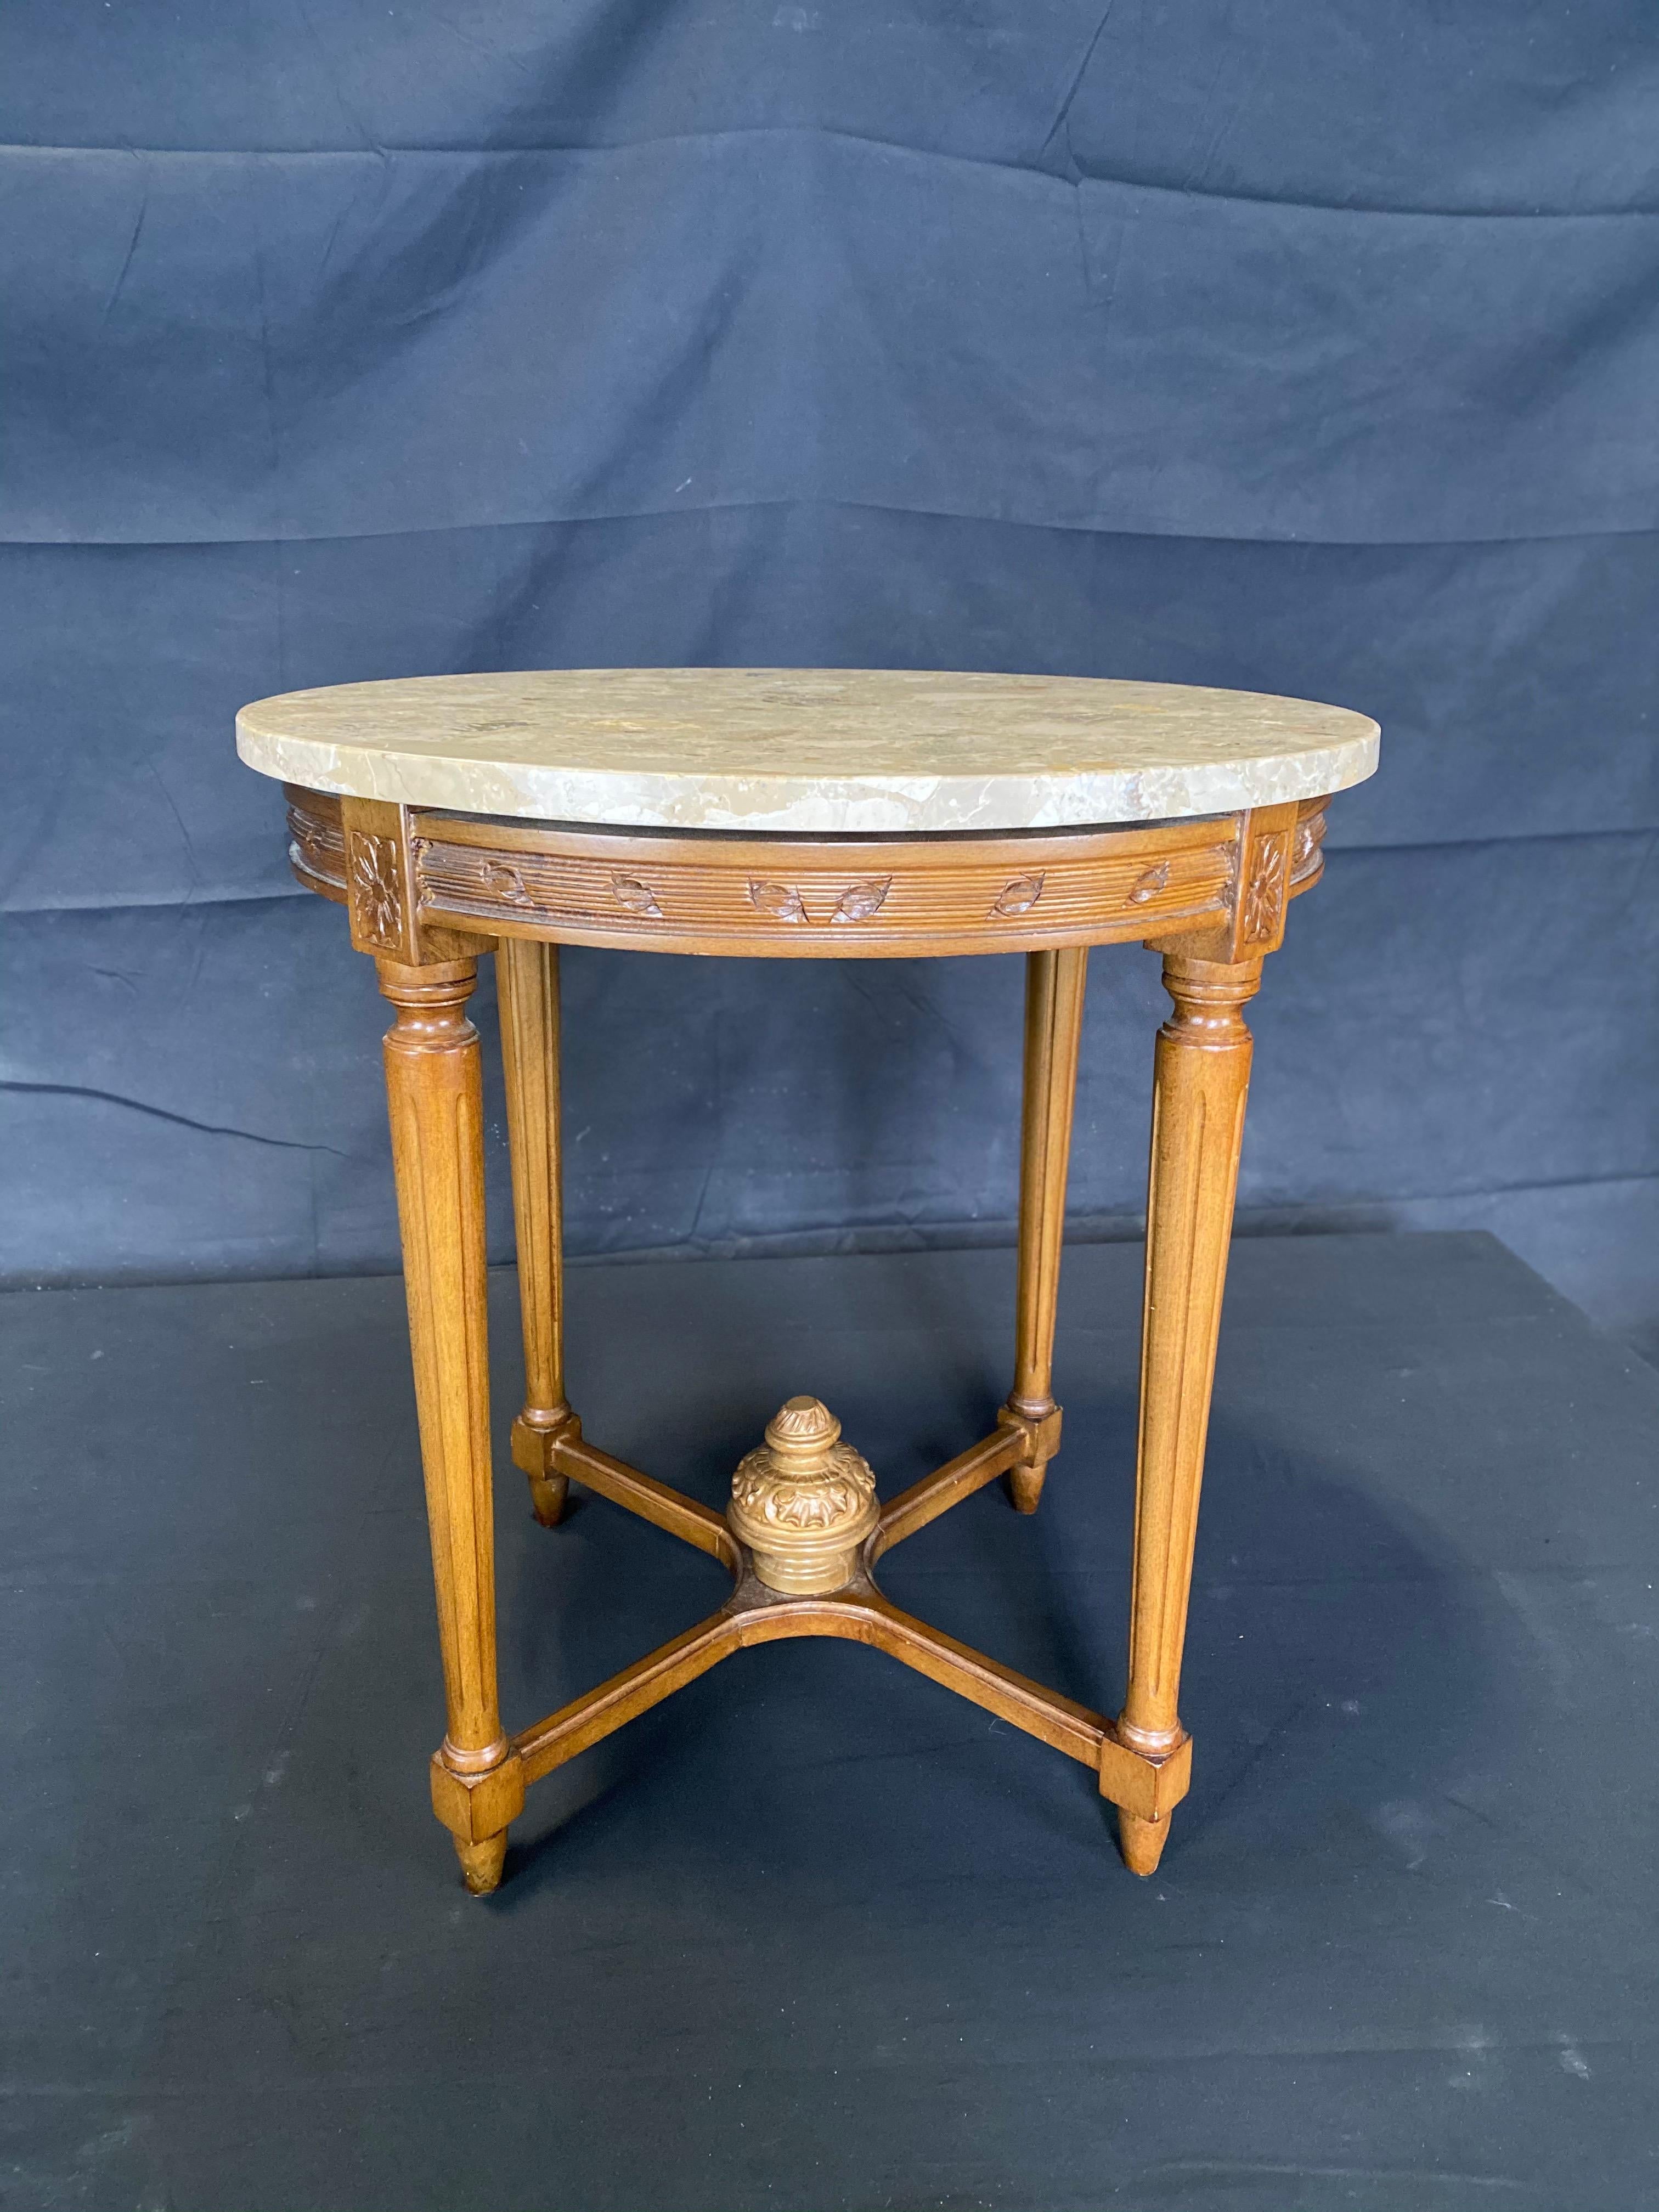 Beautiful walnut French side table or nightstand having a greige (grayish beige) marble top and pretty carvings as well as tapered reeded legs and central finial on the stretchers at the bottom. Great, versatile size!

#5048.